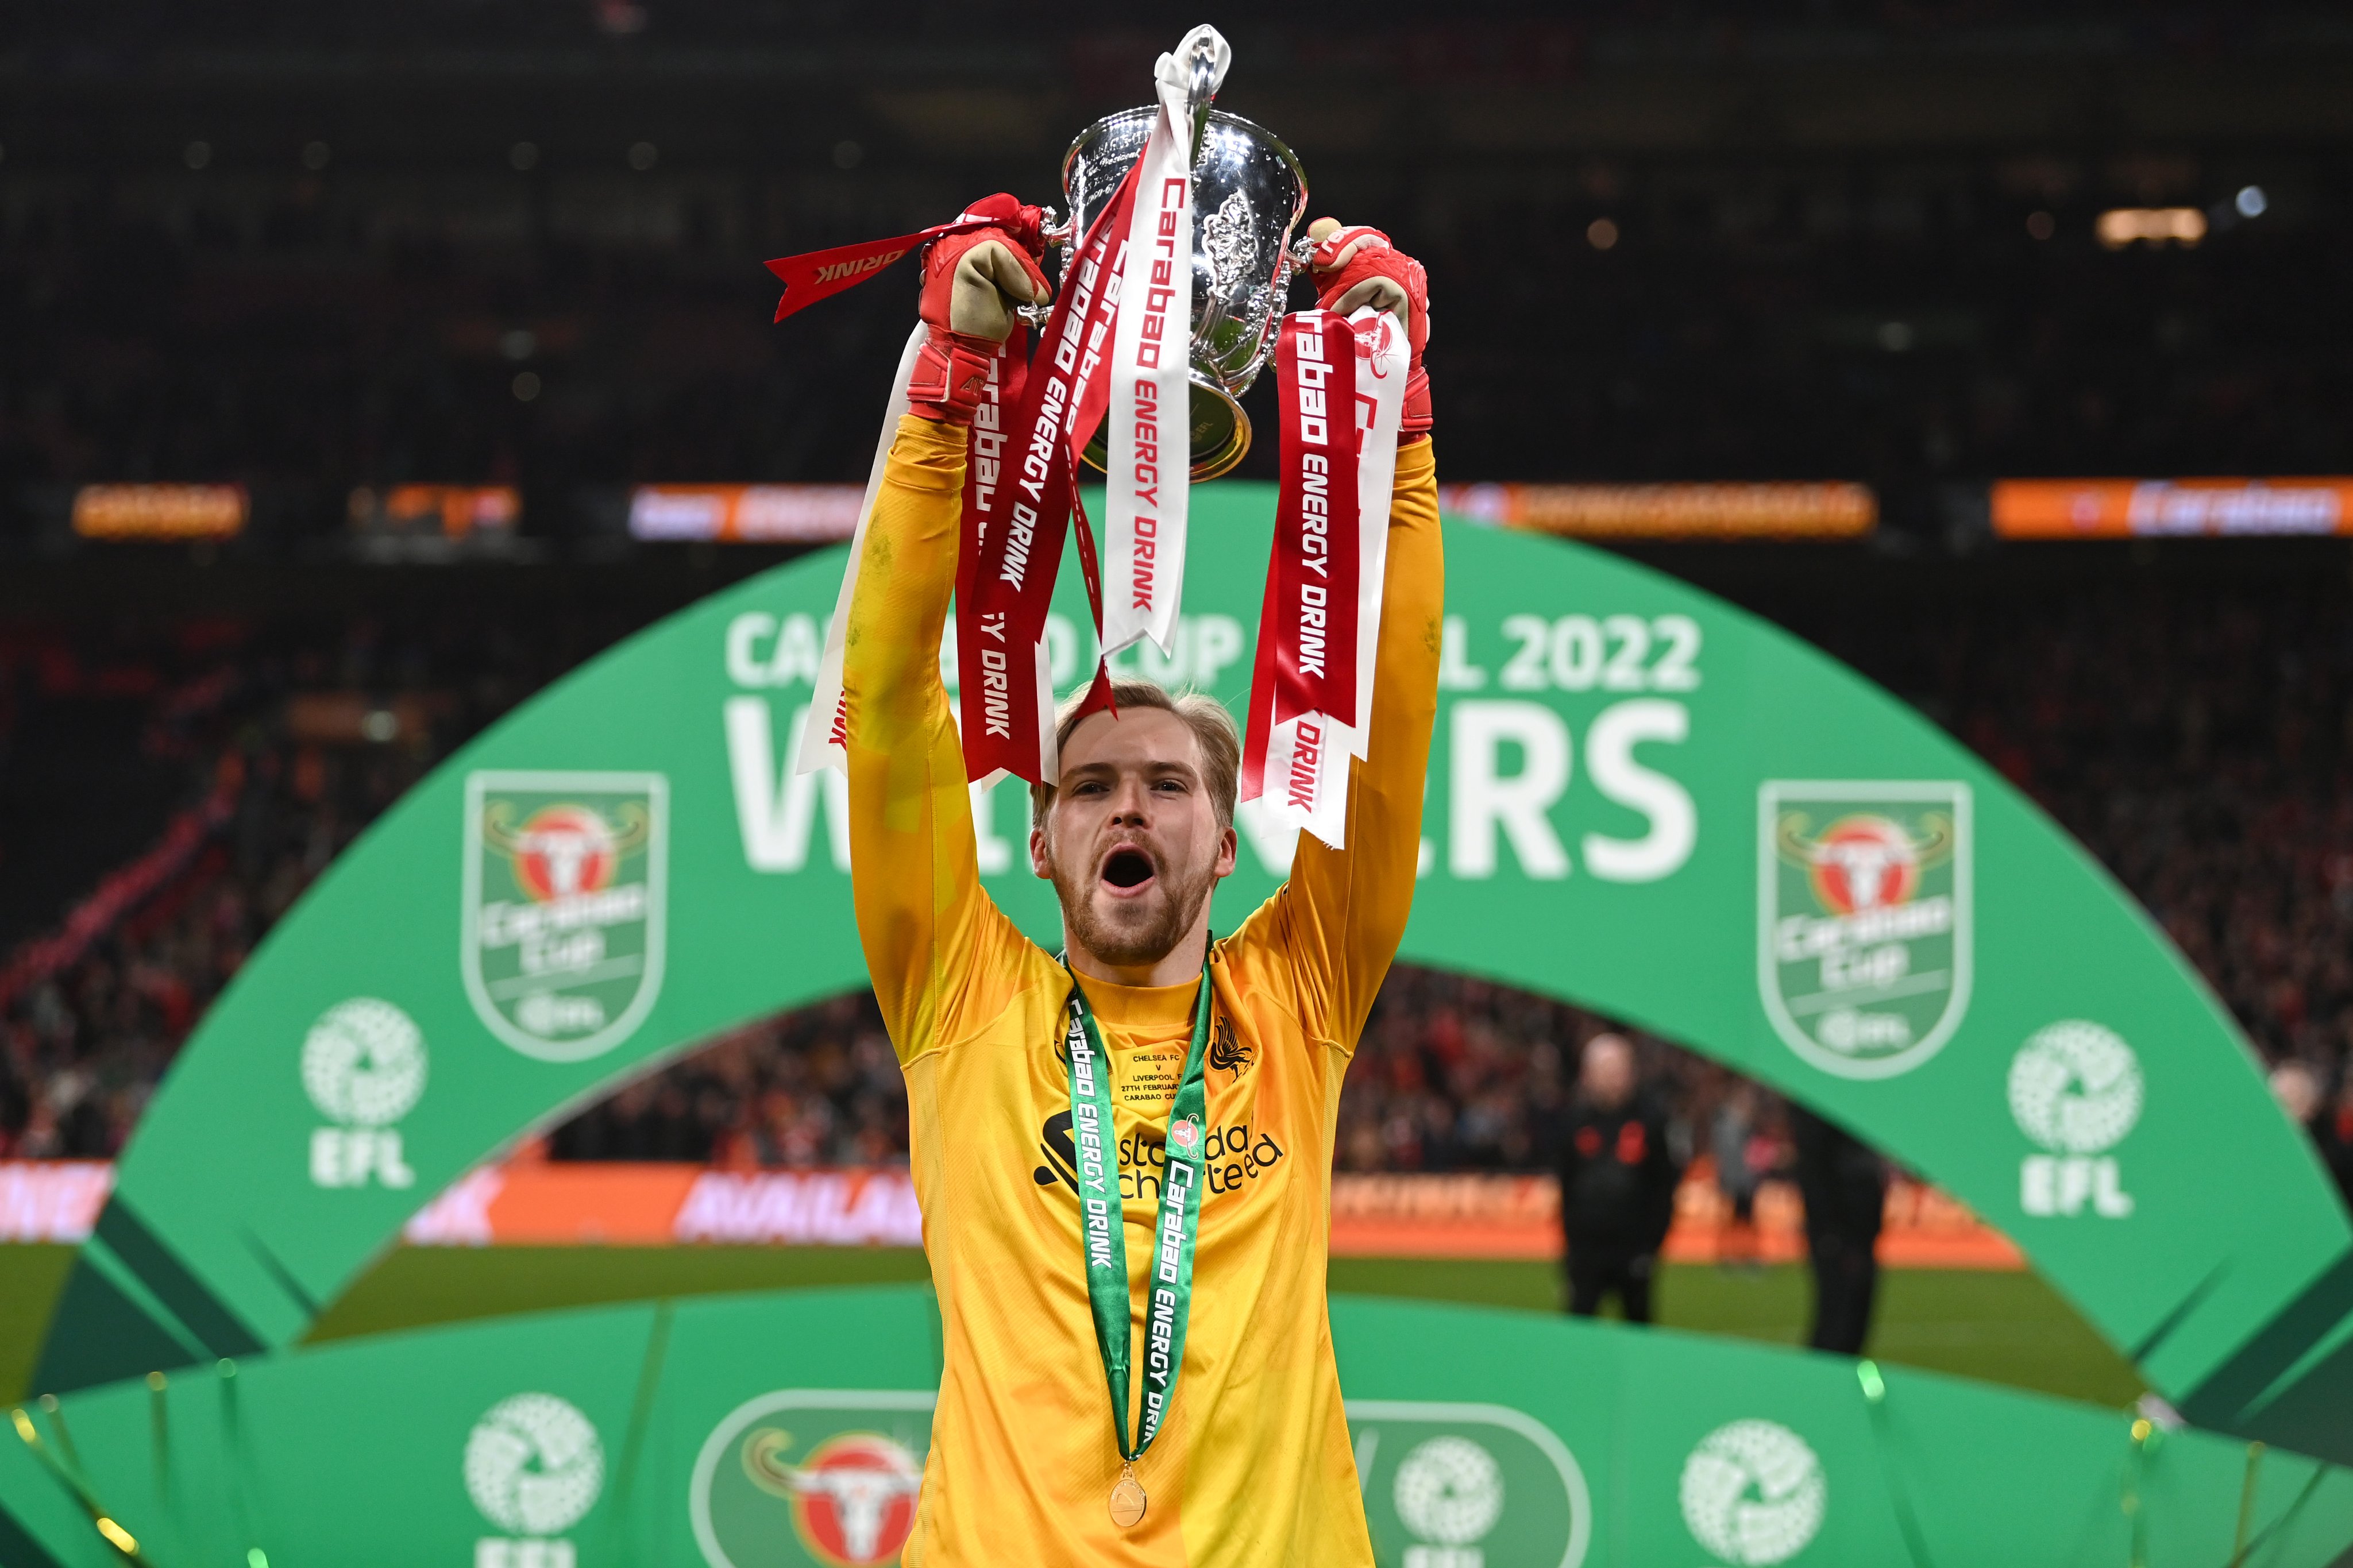 Liverpool wins the Carabao Cup for the record ninth time at Wembley Stadium